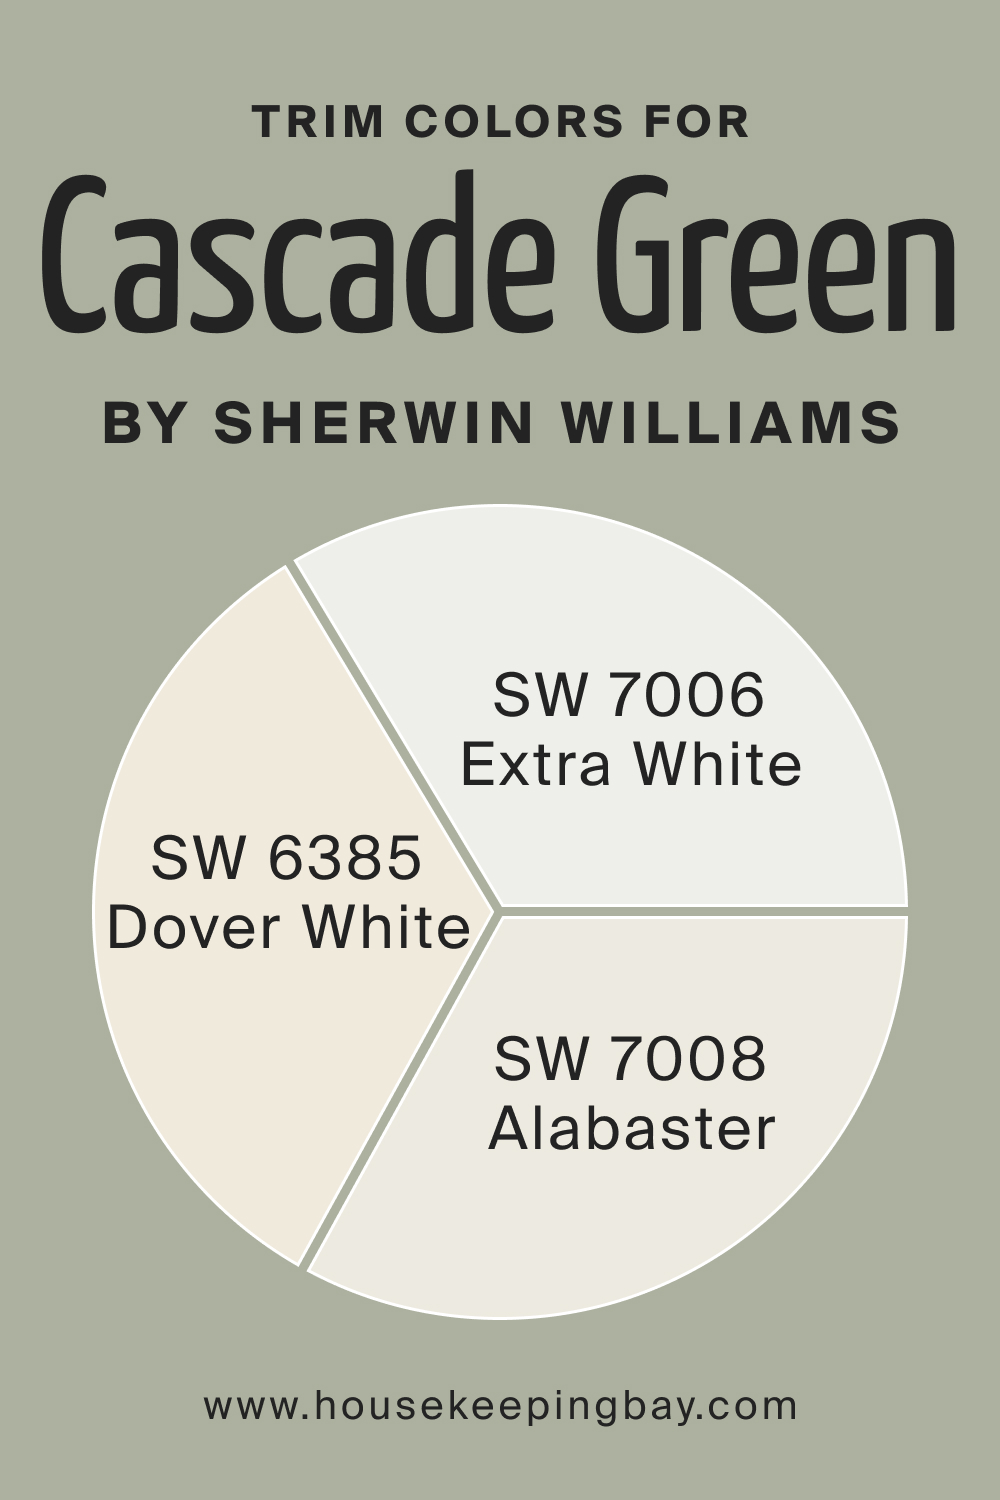 Trim Colors of SW 0066 Cascade Green by Sherwin Williams